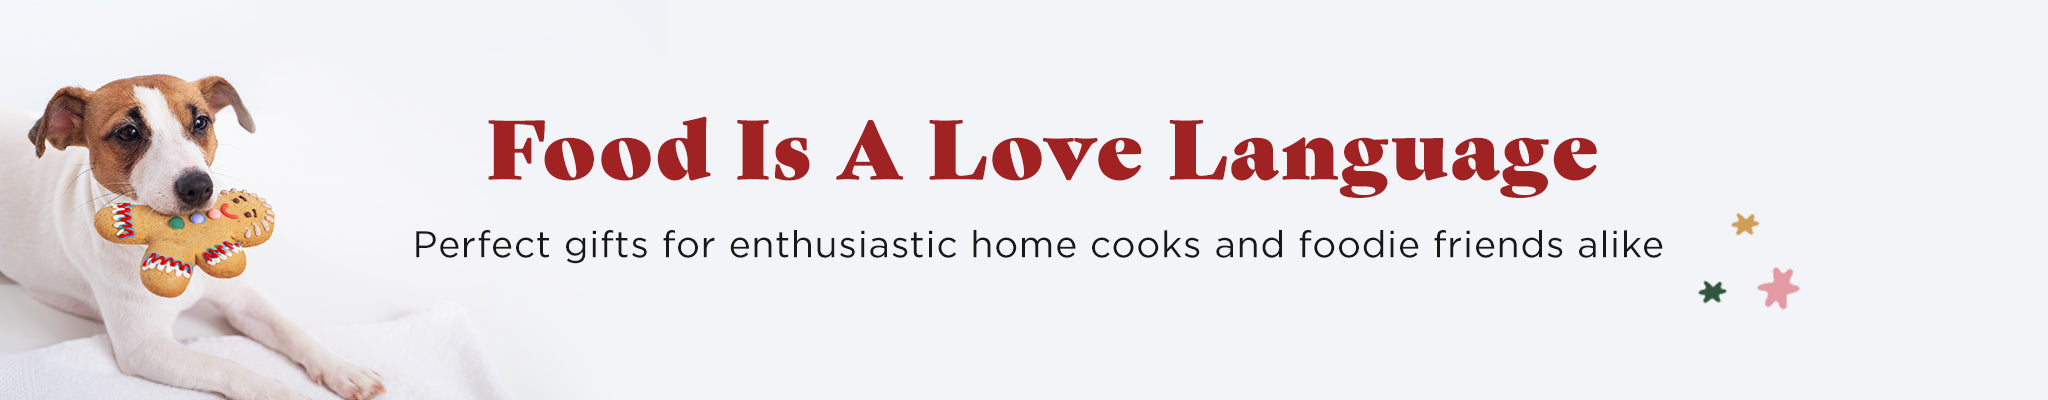 Food Is A Love Language | Perfect gifts for enthusiastic home cooks and fooodie friends alike